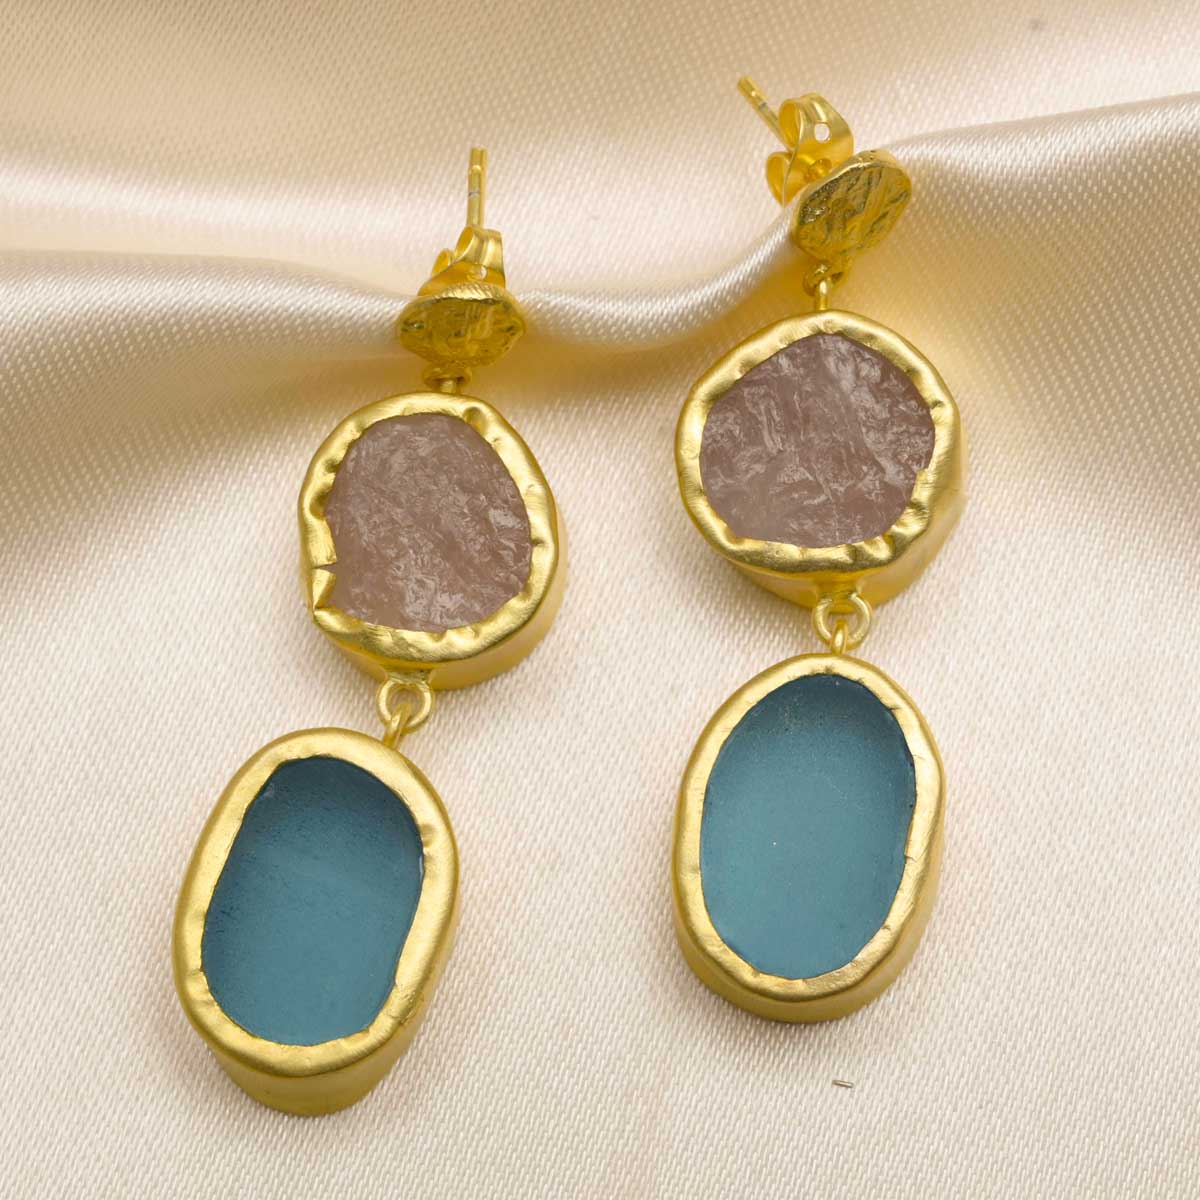 The Spirited Two Stone Gold Earrings with Rose Quartz and Blue Topaz